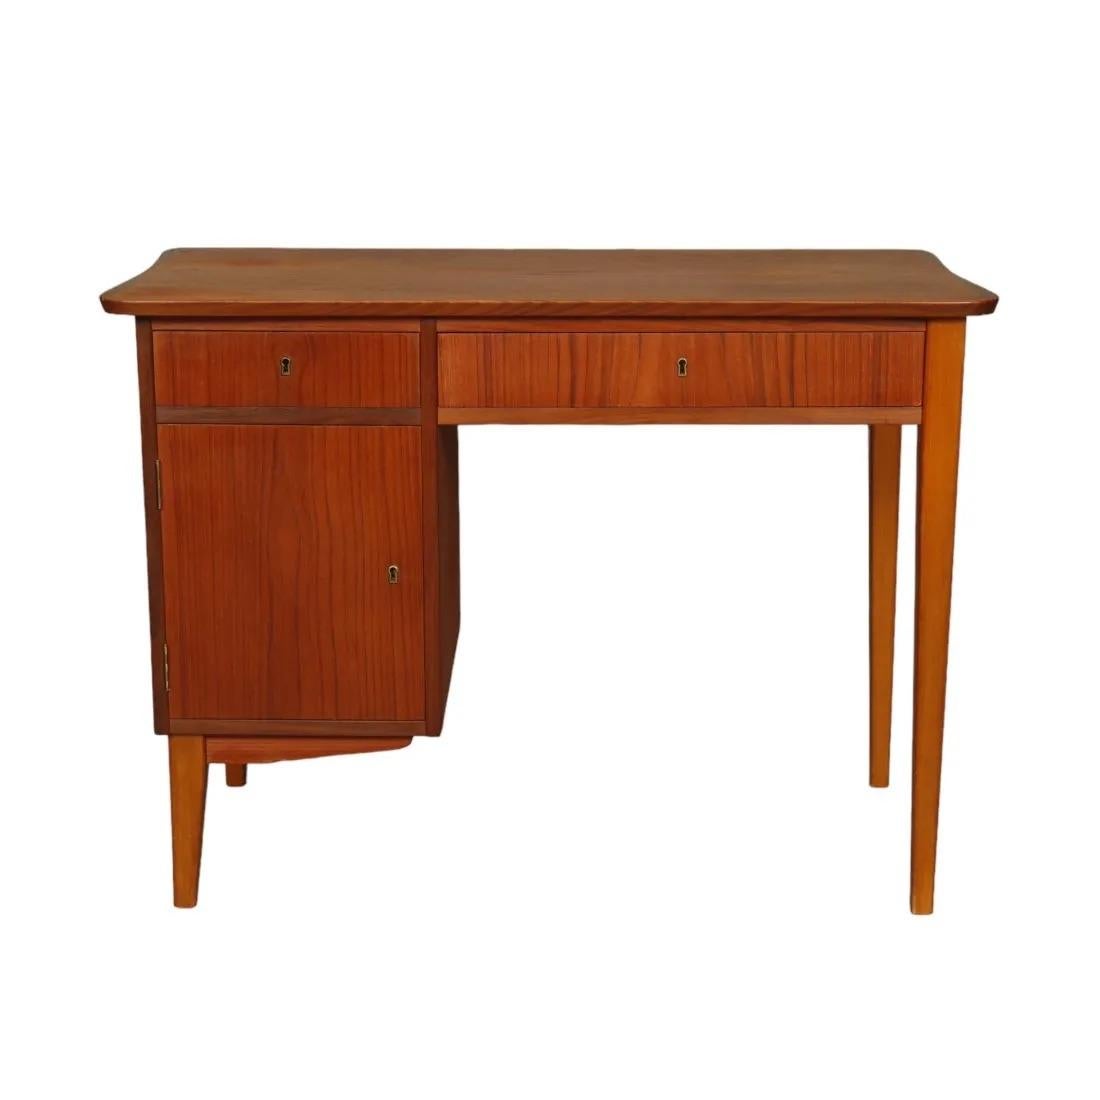 Beautiful Mid-century small desk with 3 storage areas (two drawers and a larger storage space on the bottom left.  
beautiful craftsmanship and detail featuring 
this piece was made in Denmark early 1960's and very good condition considering use and